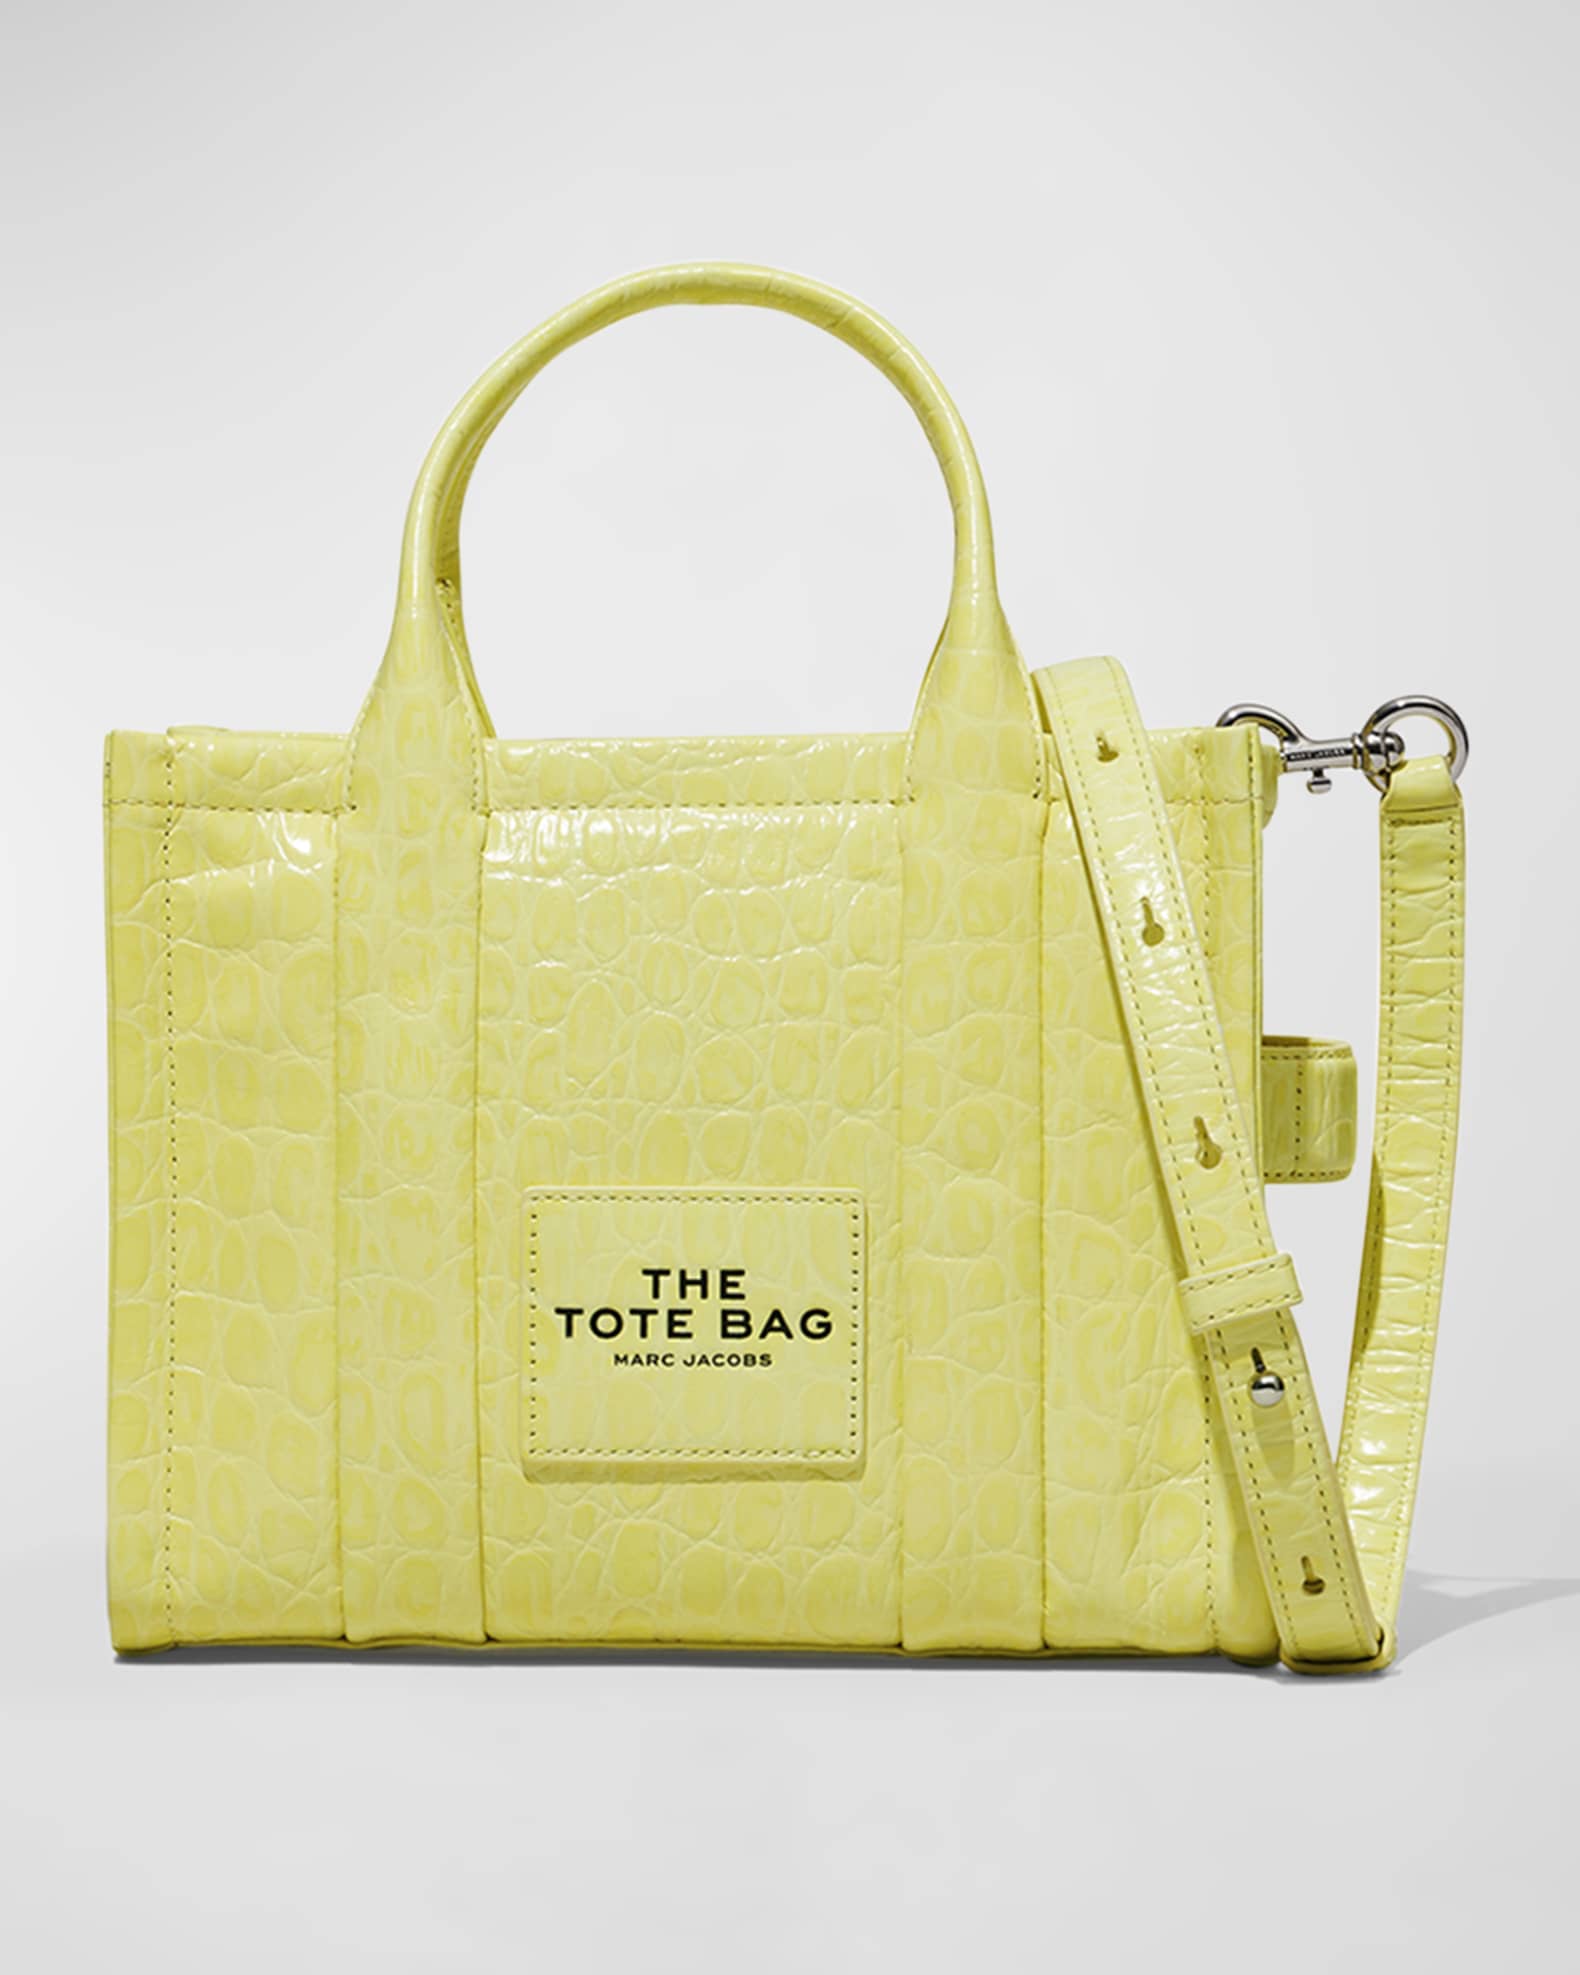 Marc Jacobs The Leather tote bag - Yellow